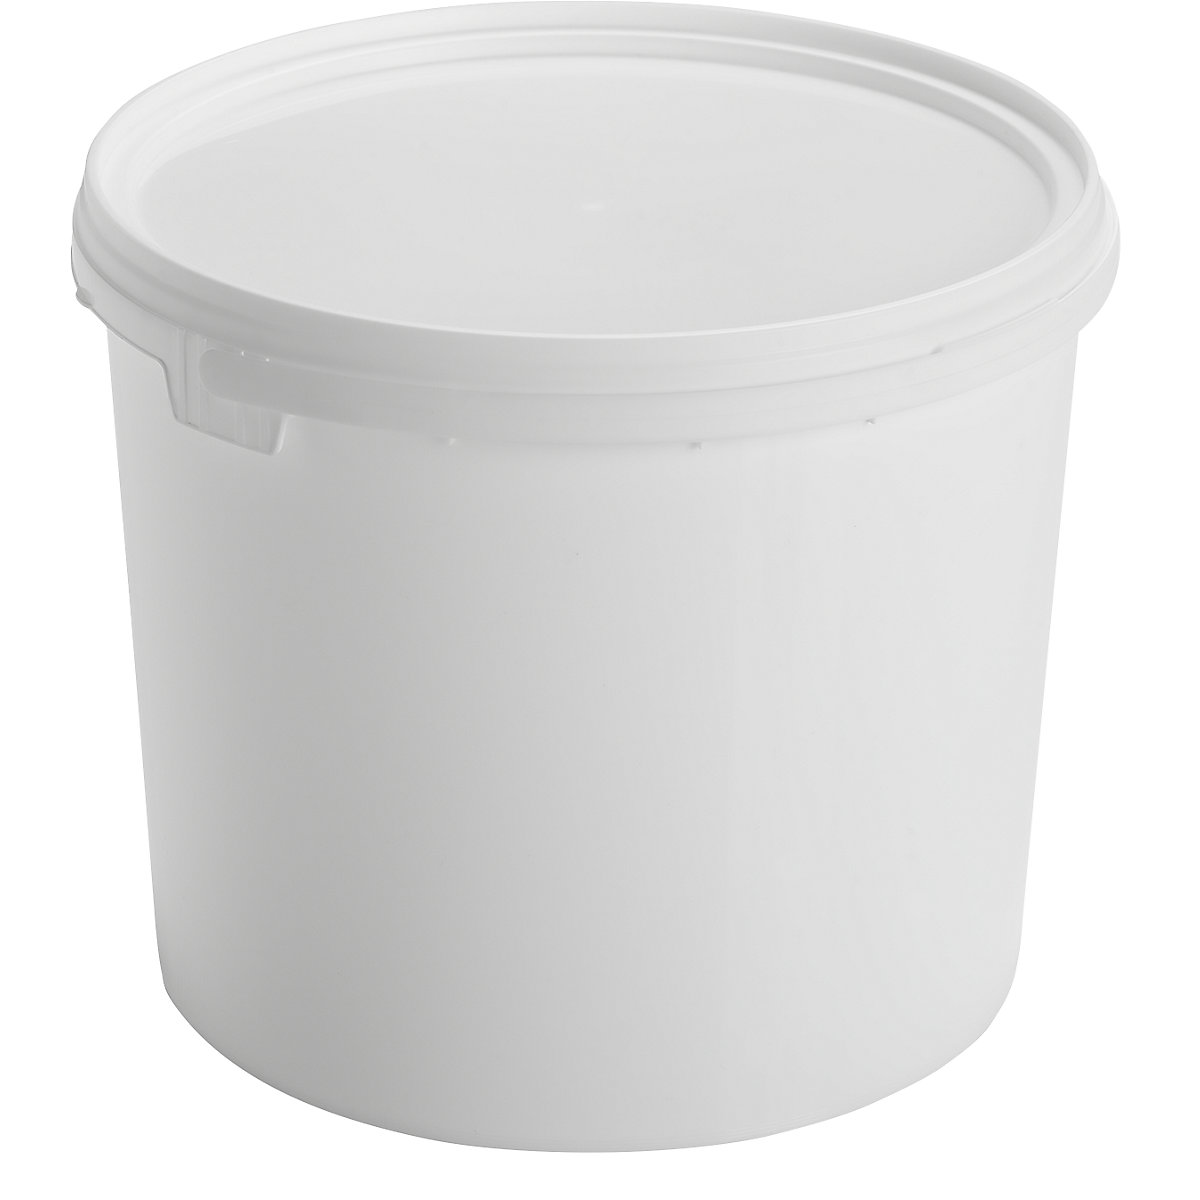 Bucket with lid – eurokraft basic, suitable for foodstuffs, 10+ items, capacity 5 l-8